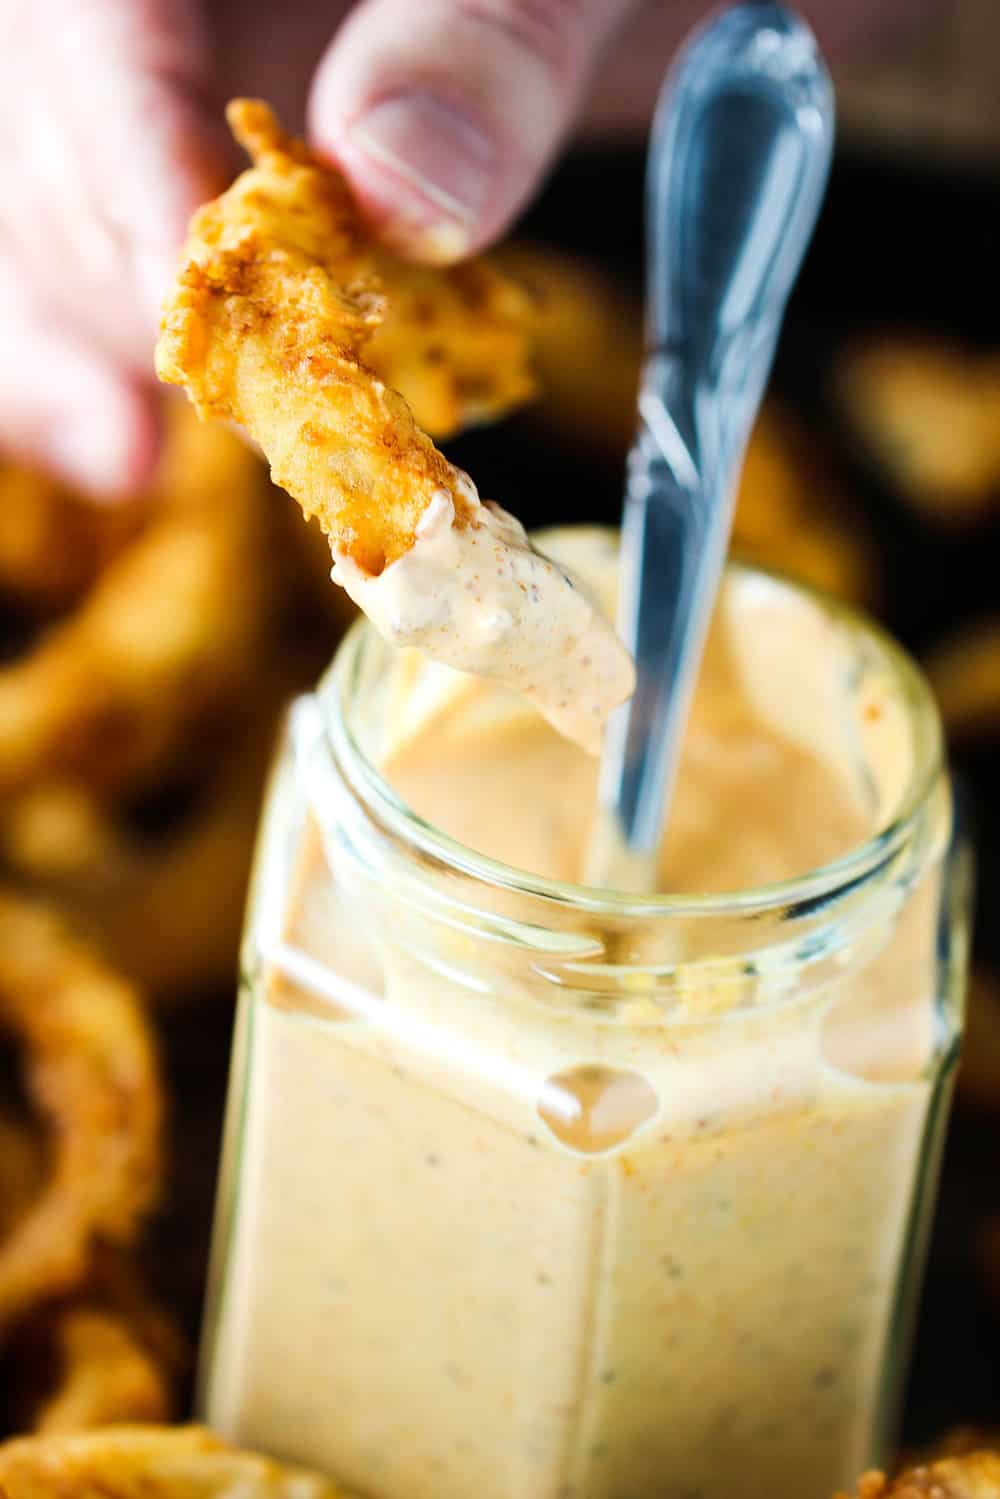 Onion ring dipping into a jar of cajun remoulade